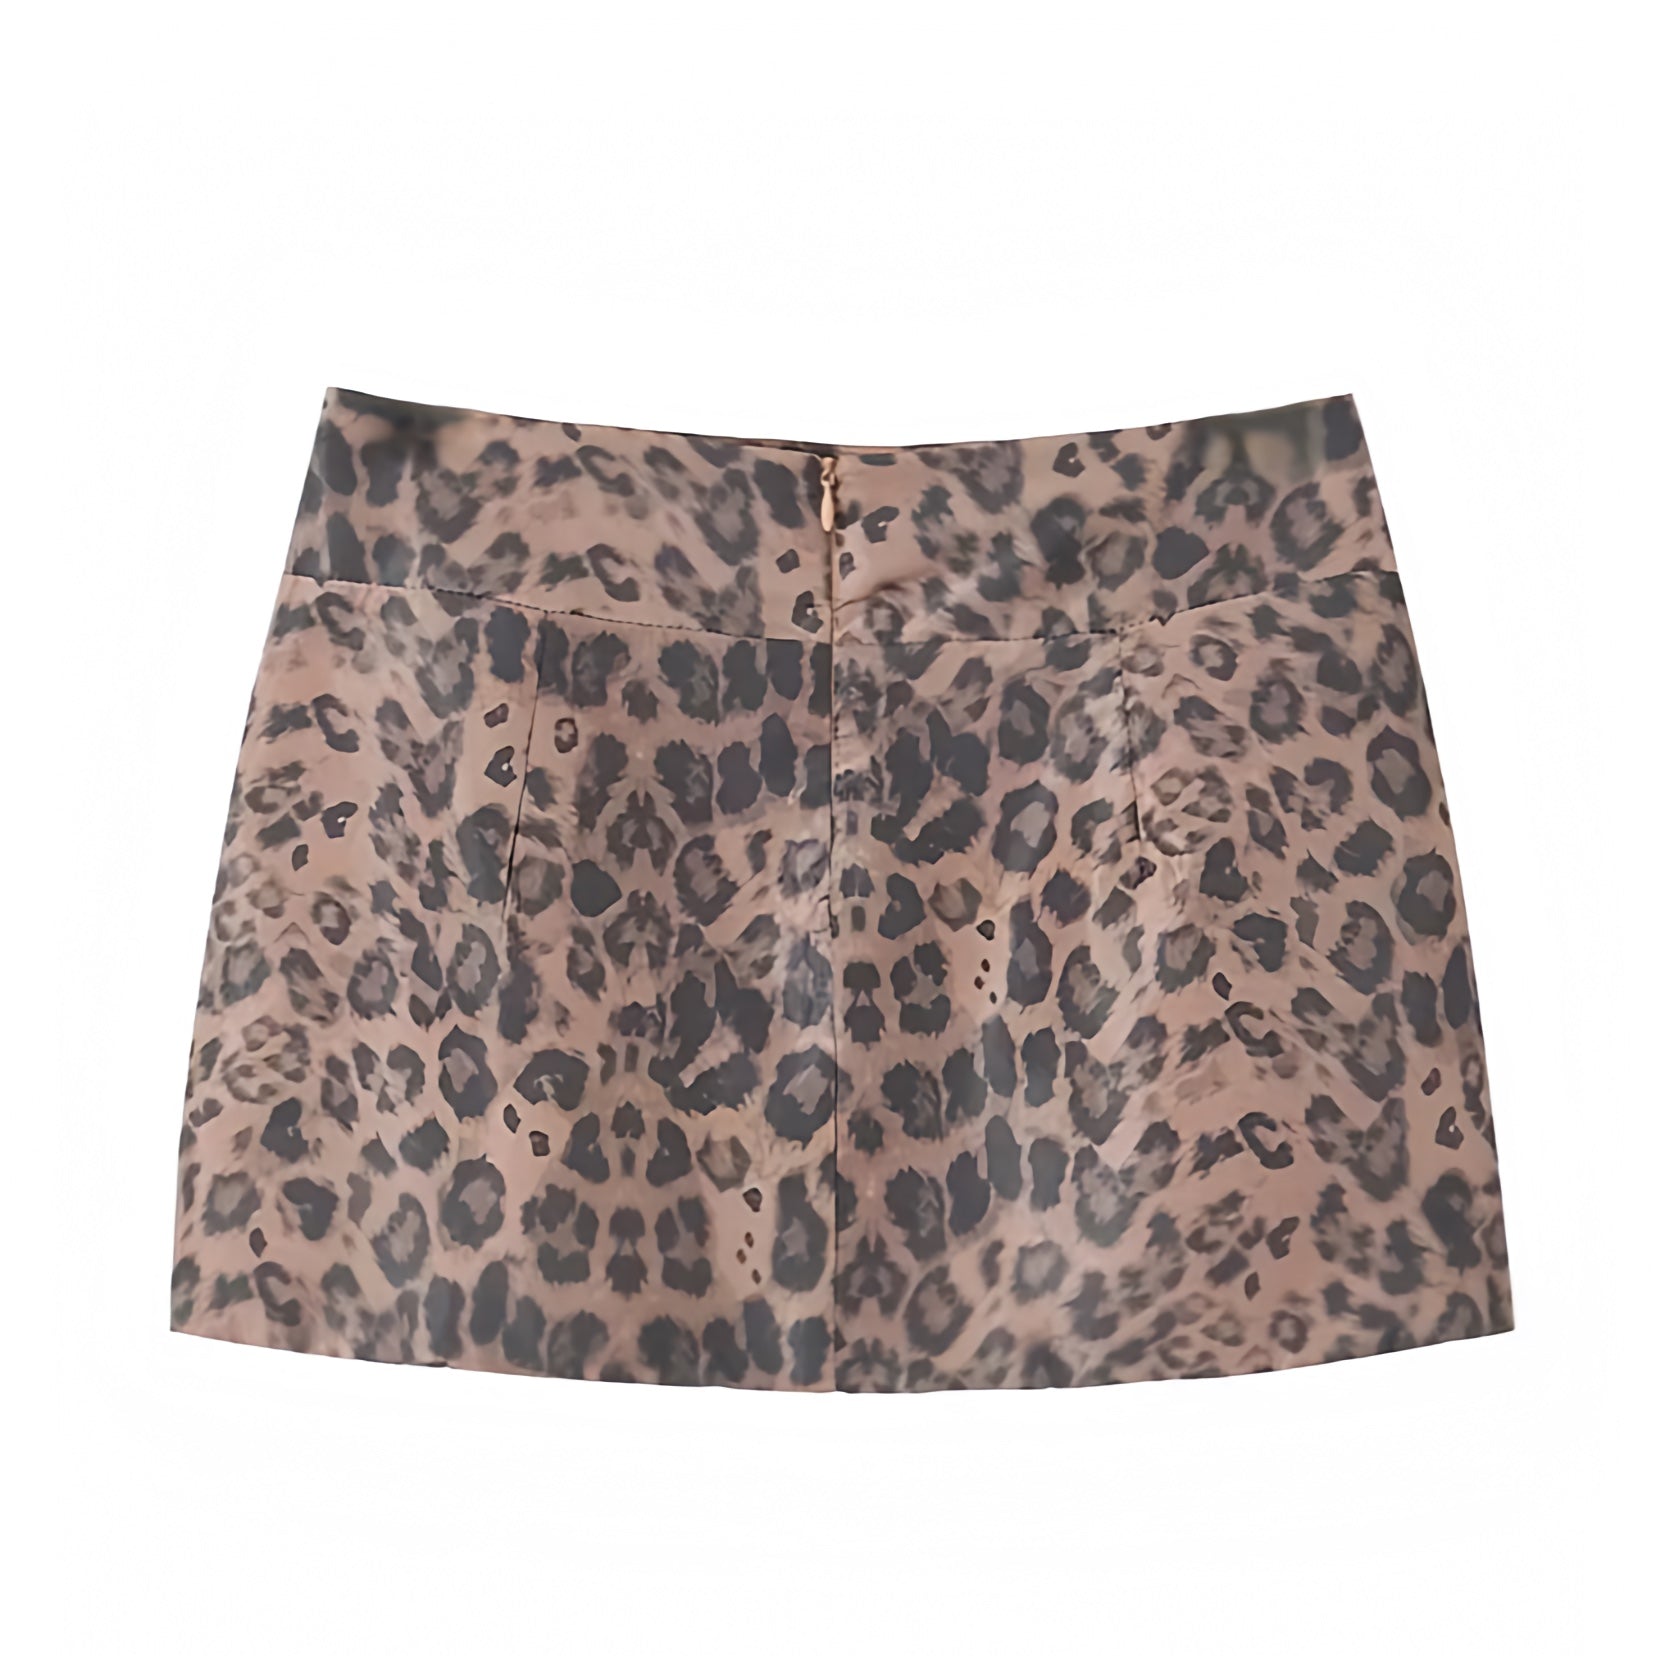 leopard-cheetah-animal-print-patterned-brown-black-multi-color-slim-fit-mid-low-rise-pencil-short-micro-mini-skirt-women-ladies-chic-trendy-spring-2024-summer-casual-classy-feminine-party-date-night-out-sexy-club-wear-y2k-exotic-tropical-vacation-beach-wear-zara-revolve-white-fox-princess-polly-edikted-emminol-reformation-brandy-melville